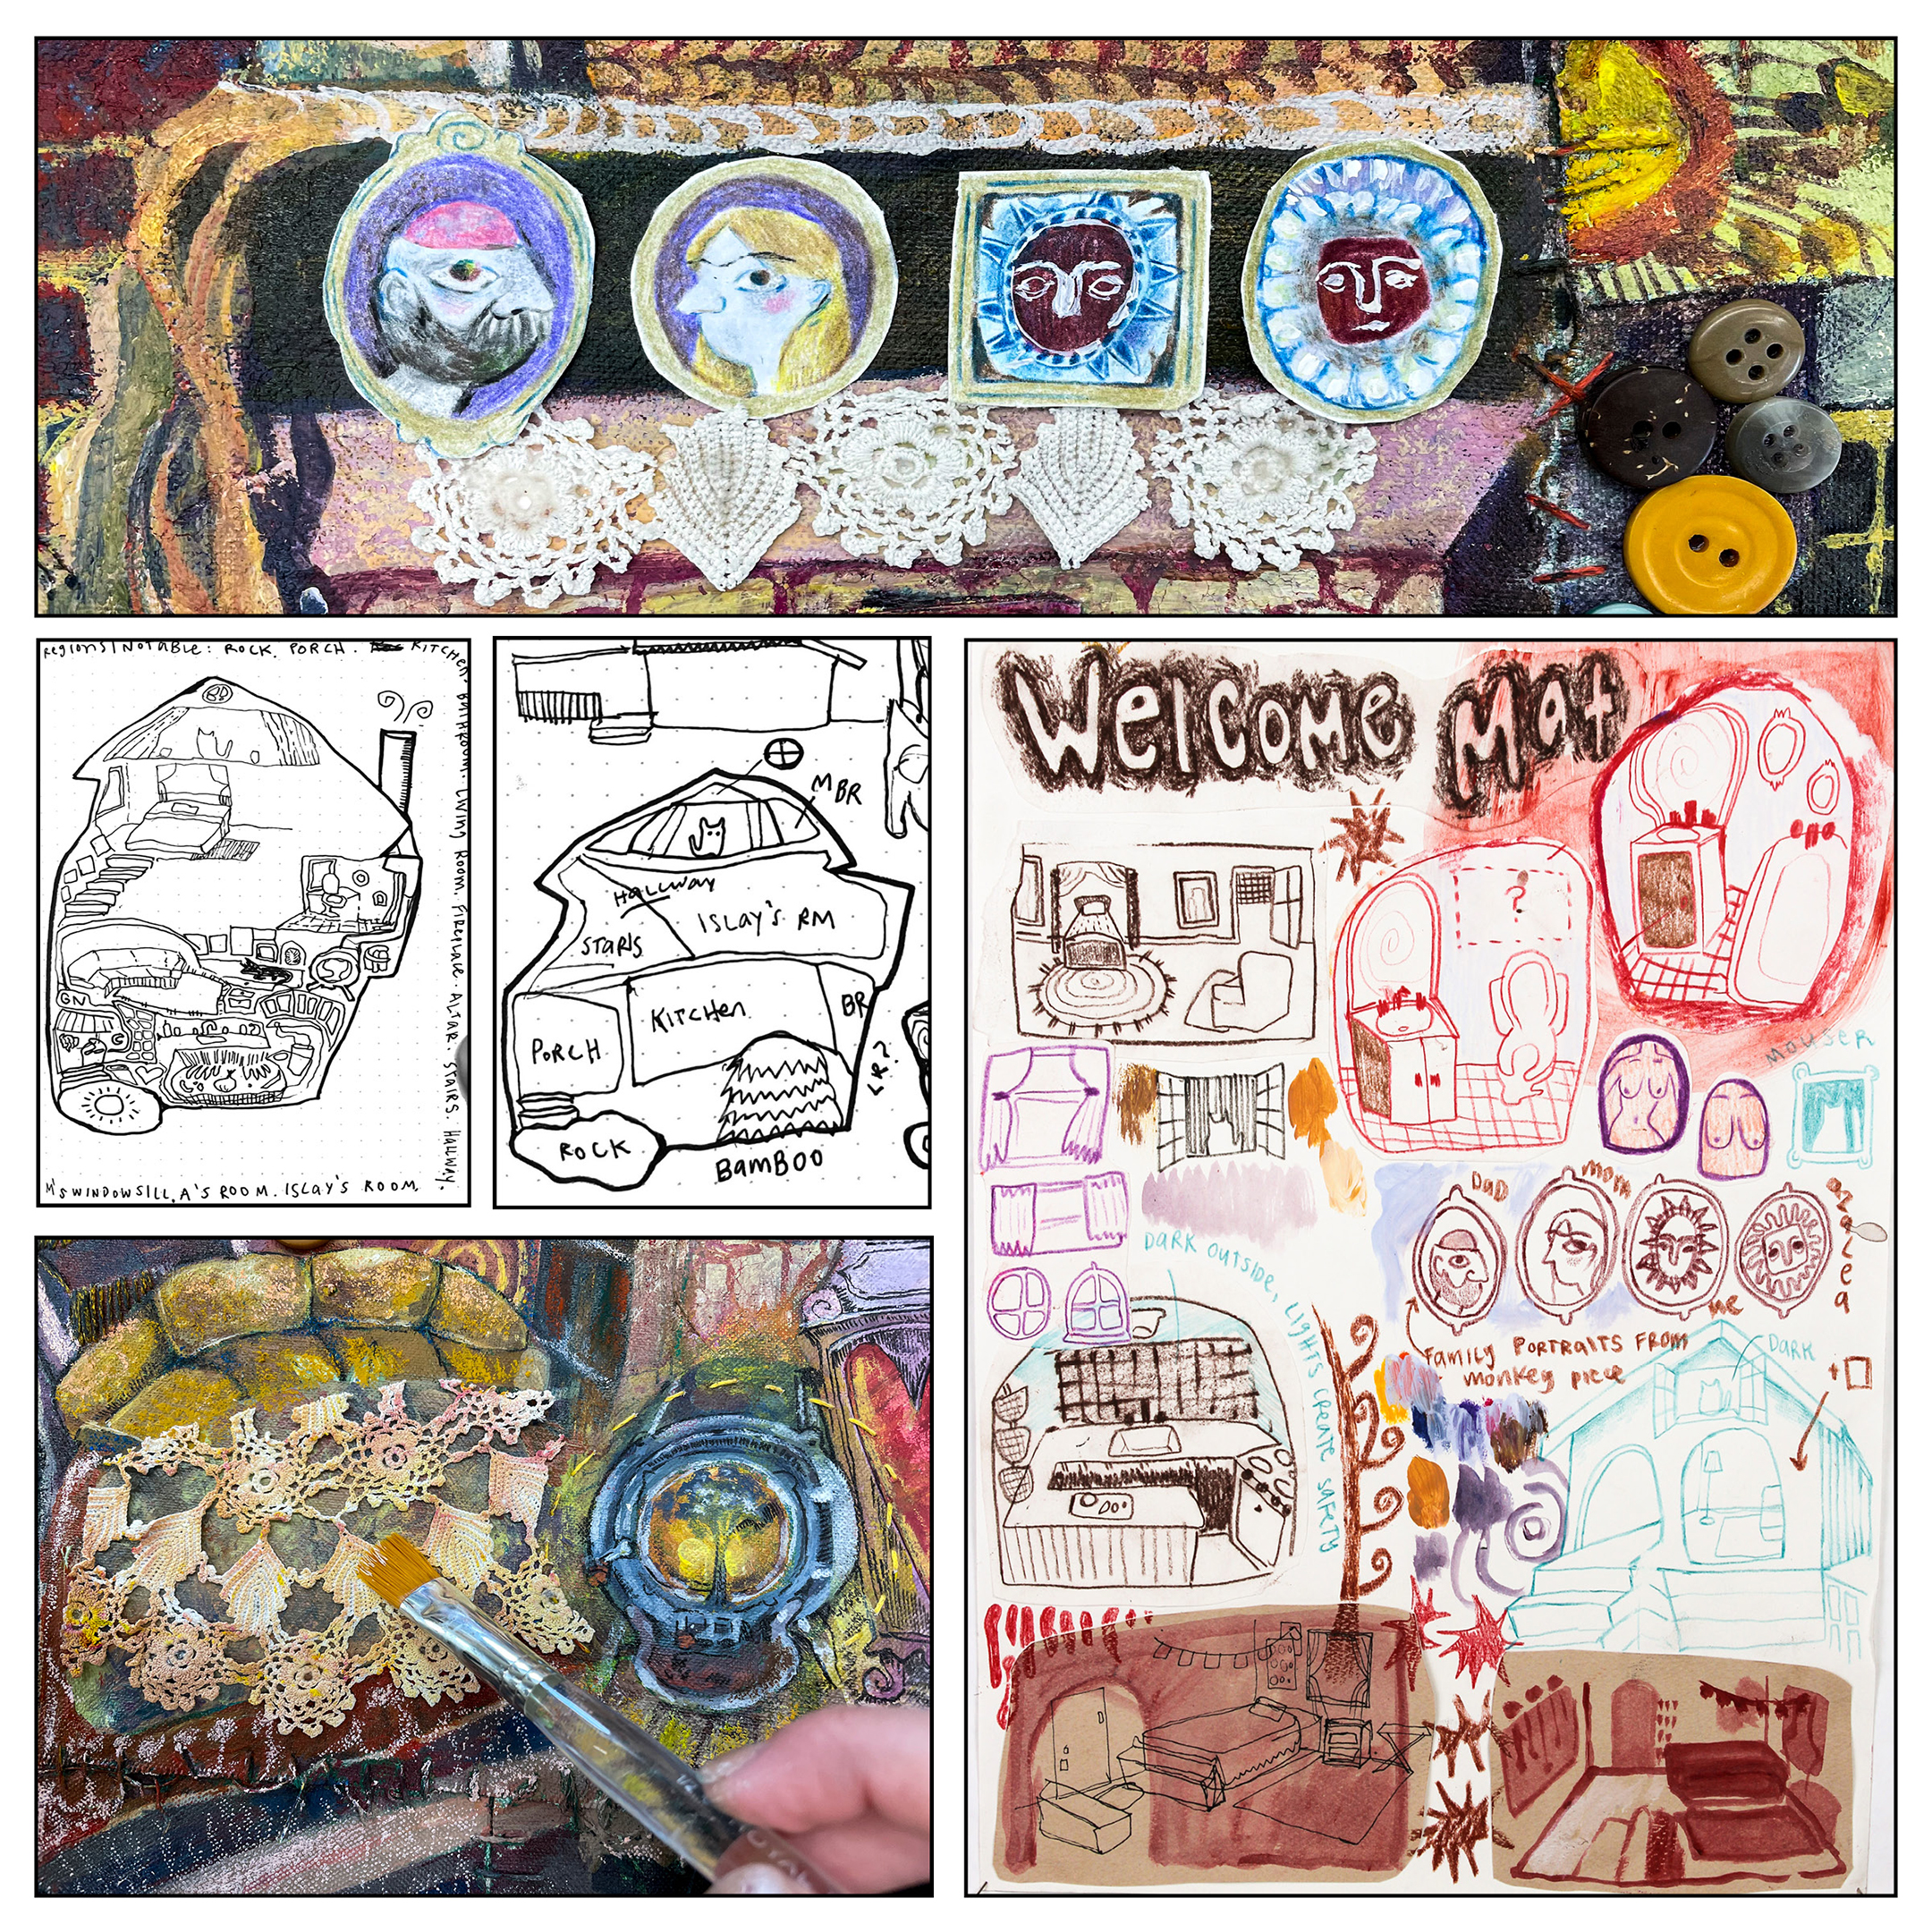 Grid of images depicting creation of mixed-media collage